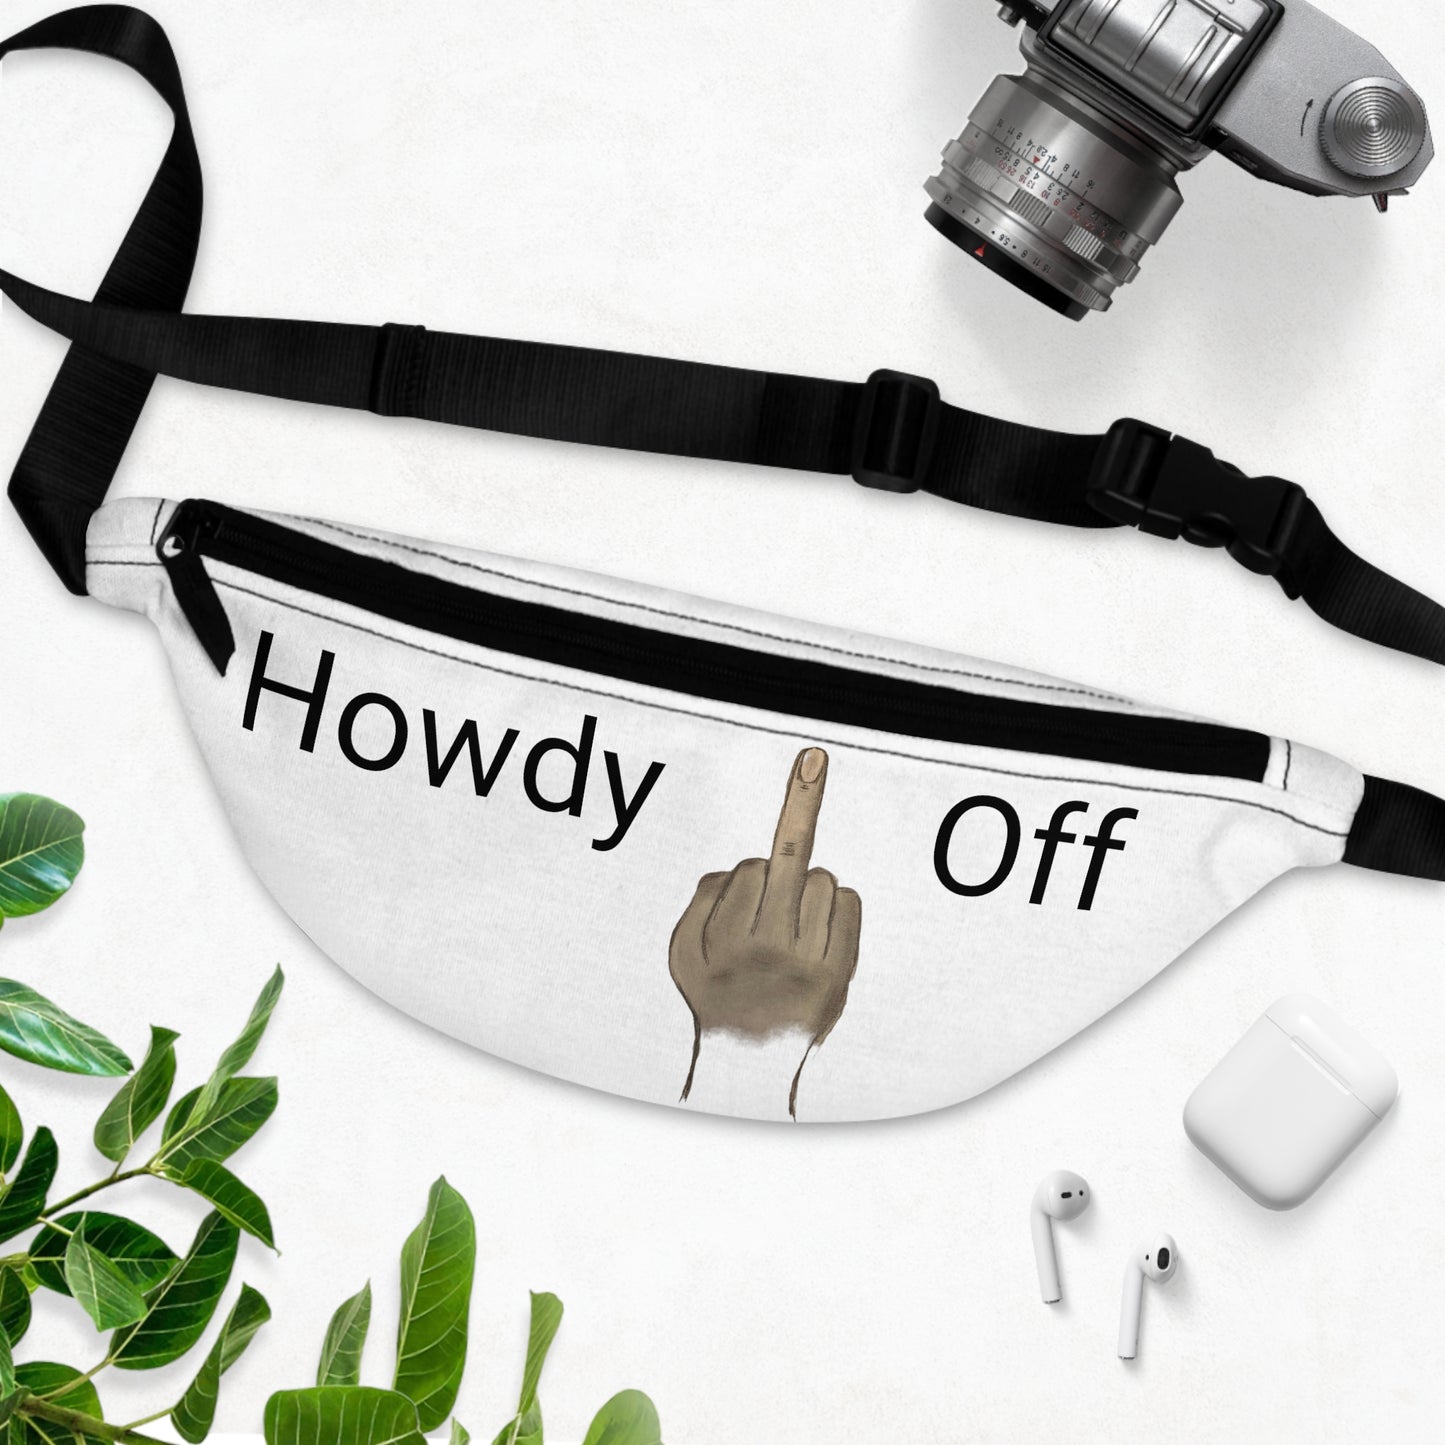 Middle finger Fanny Pack - Howdy Fuck Off